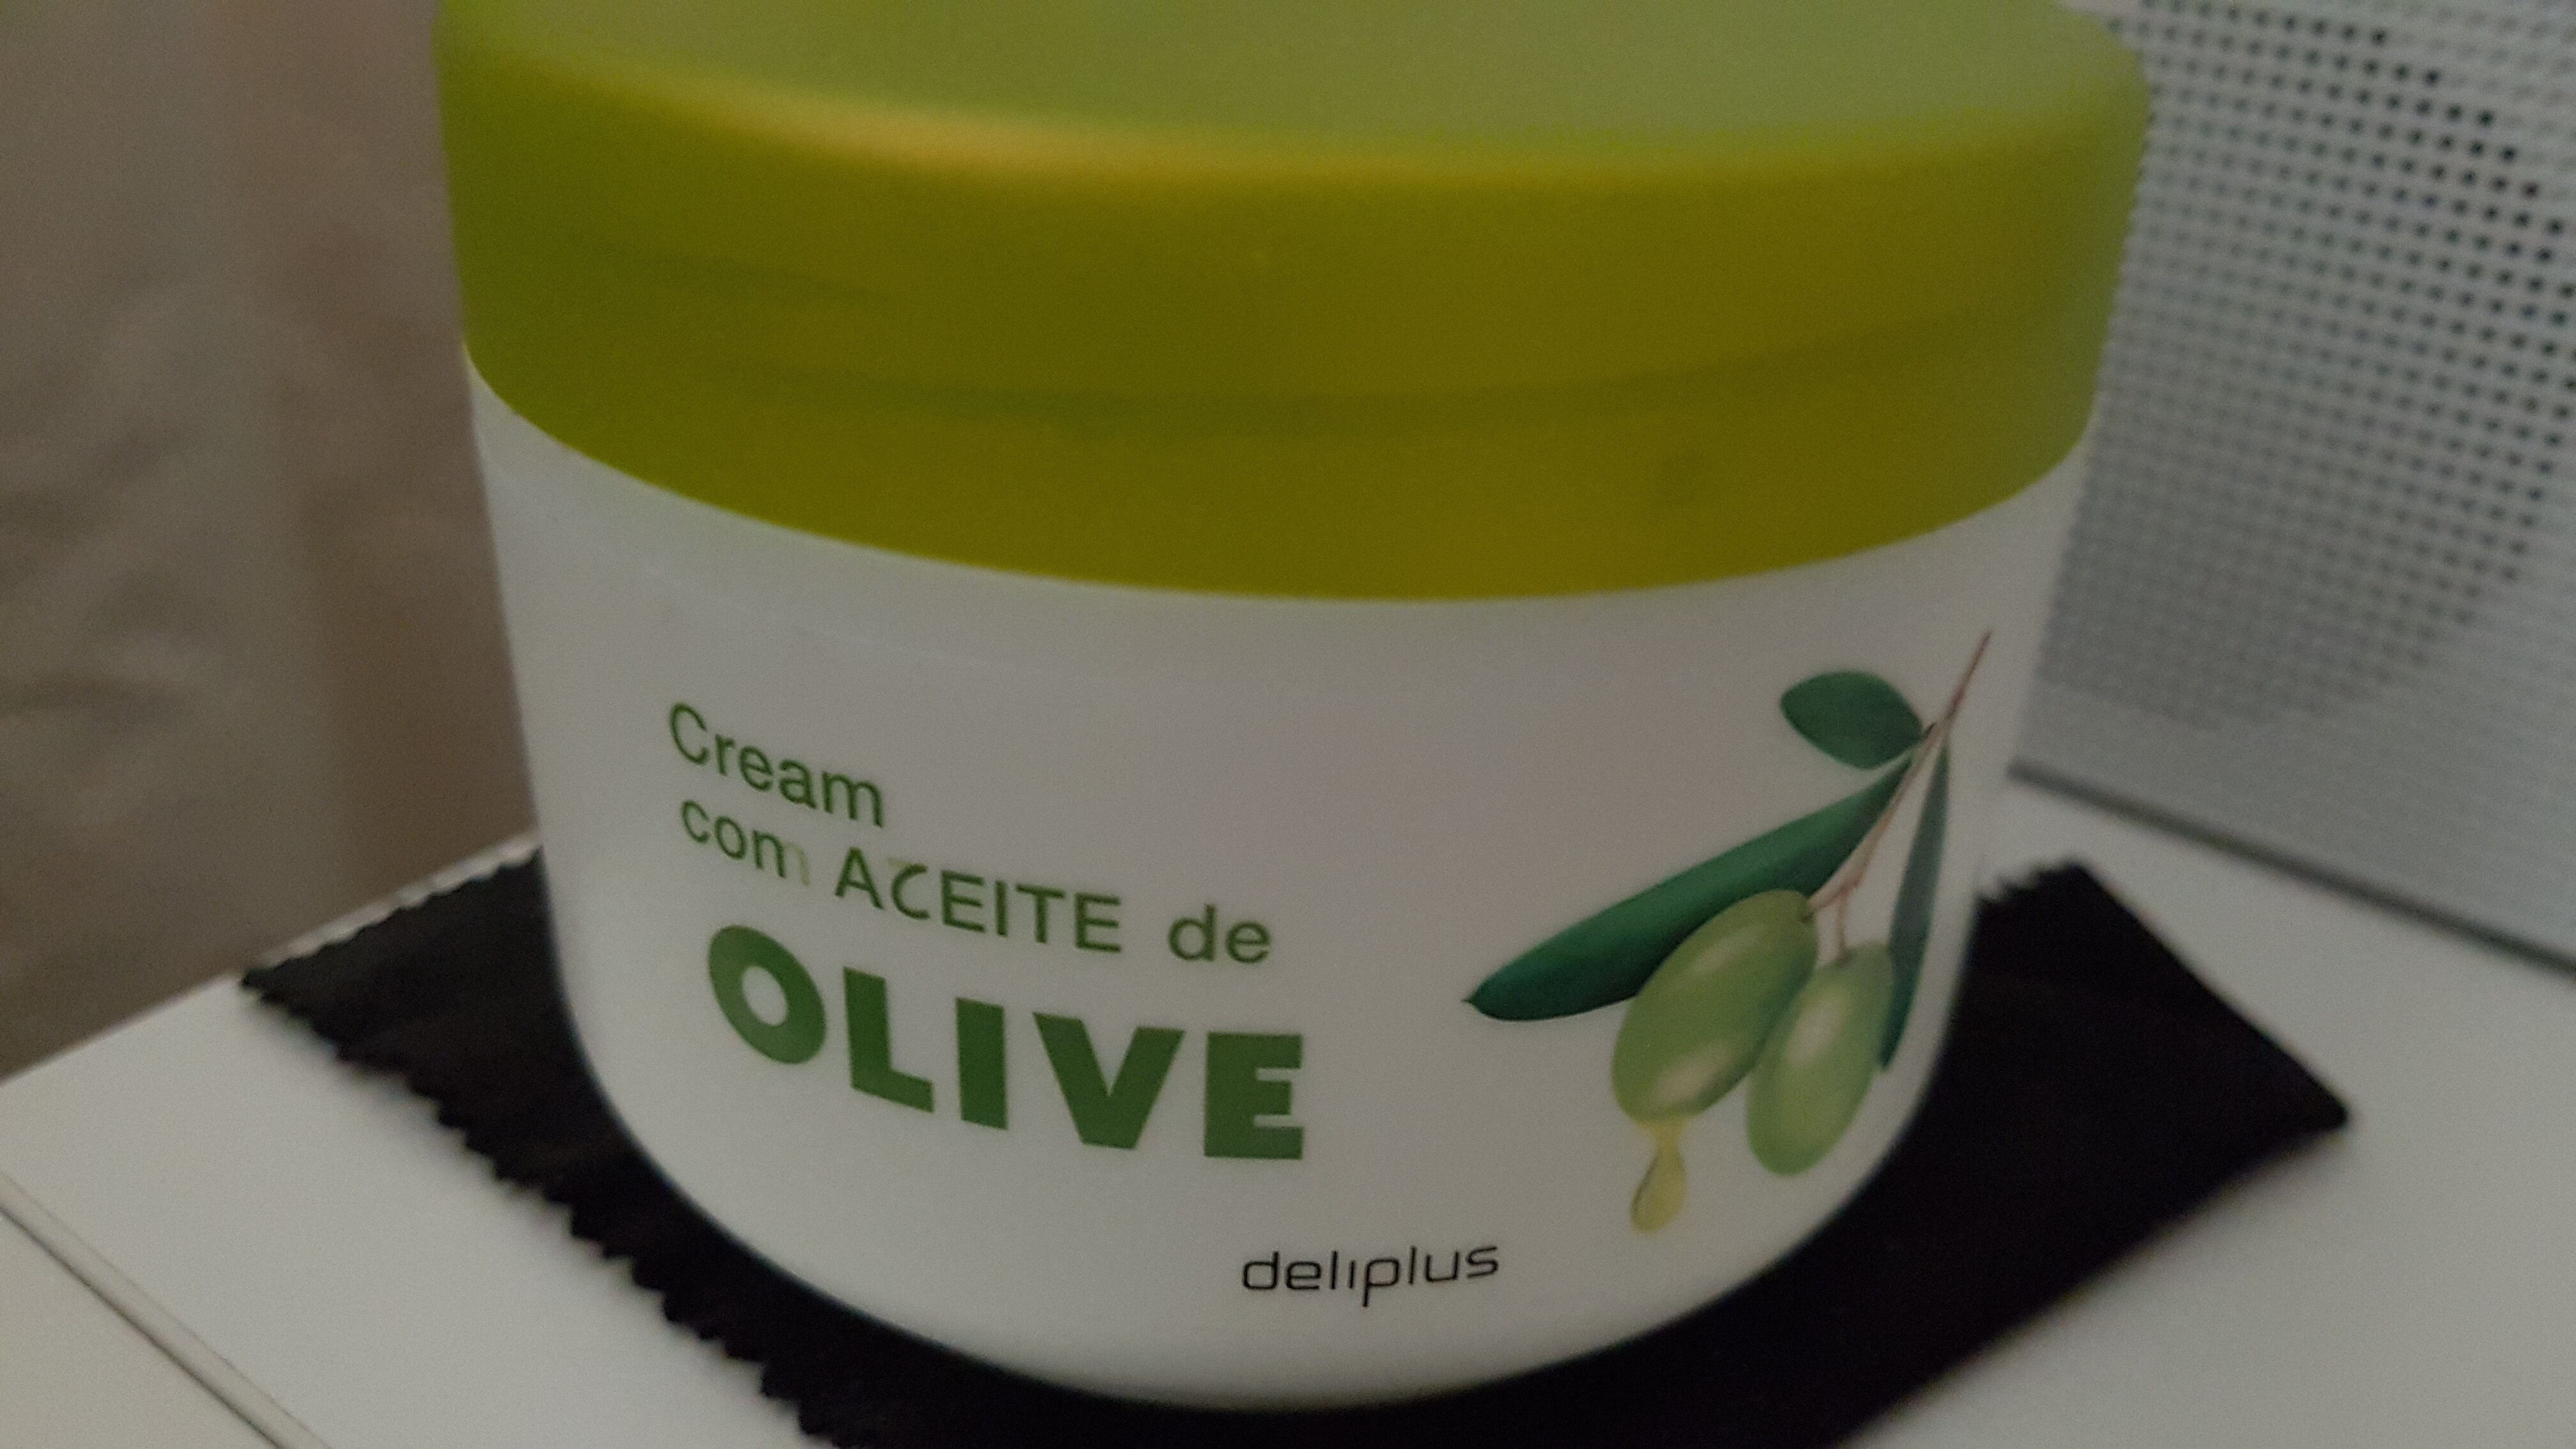 Cream with olive oil - Producto - es